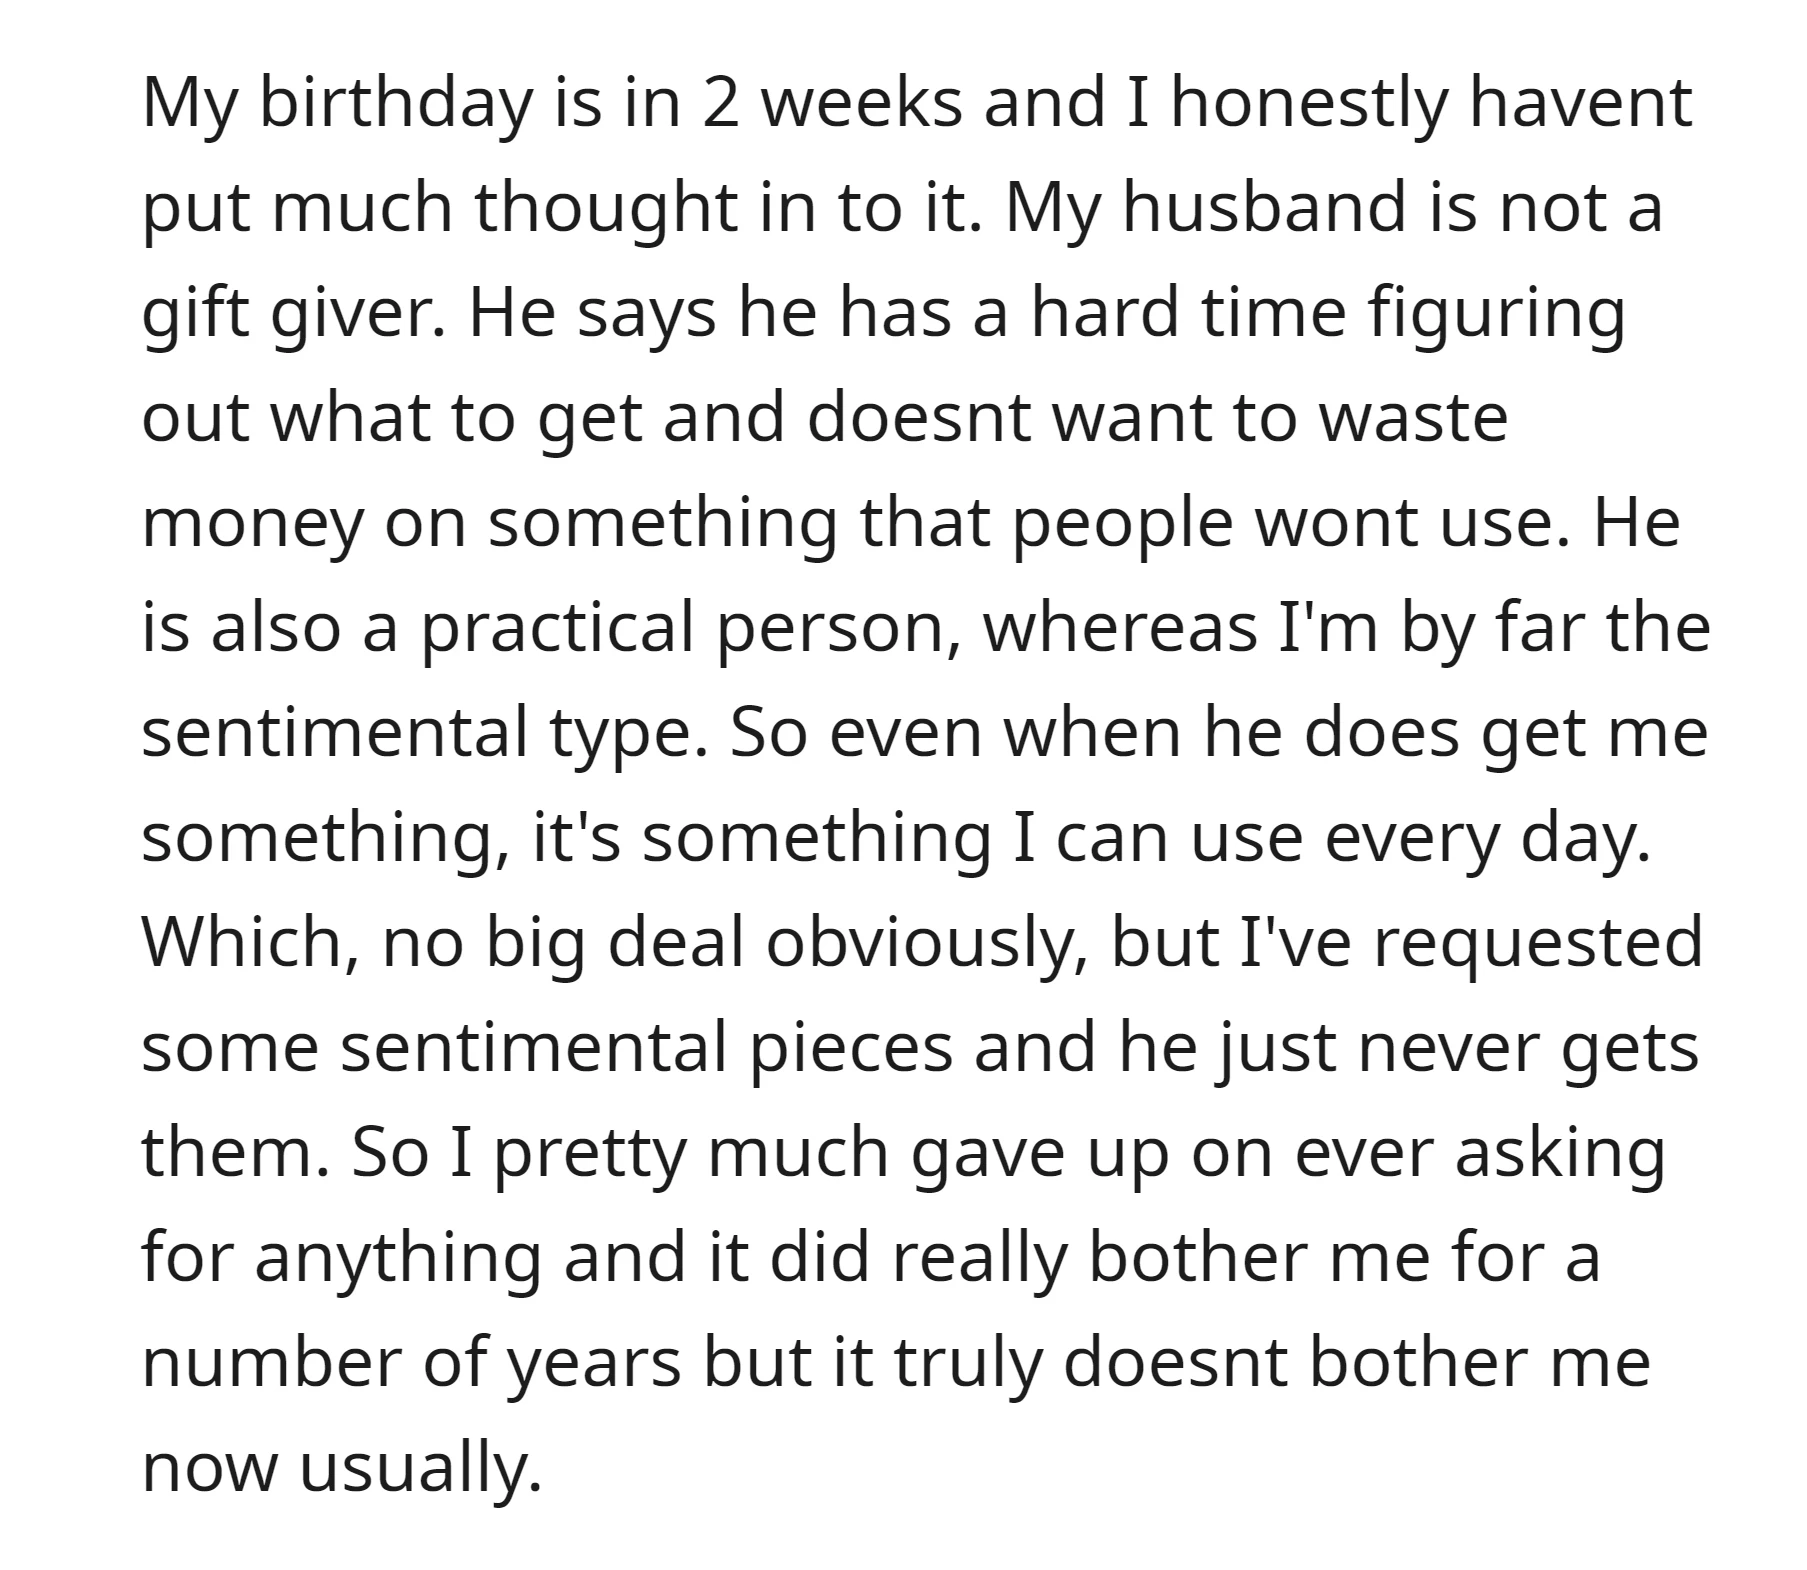 The OP's birthday was approaching, but she didn't expect to receive a gift from her husband